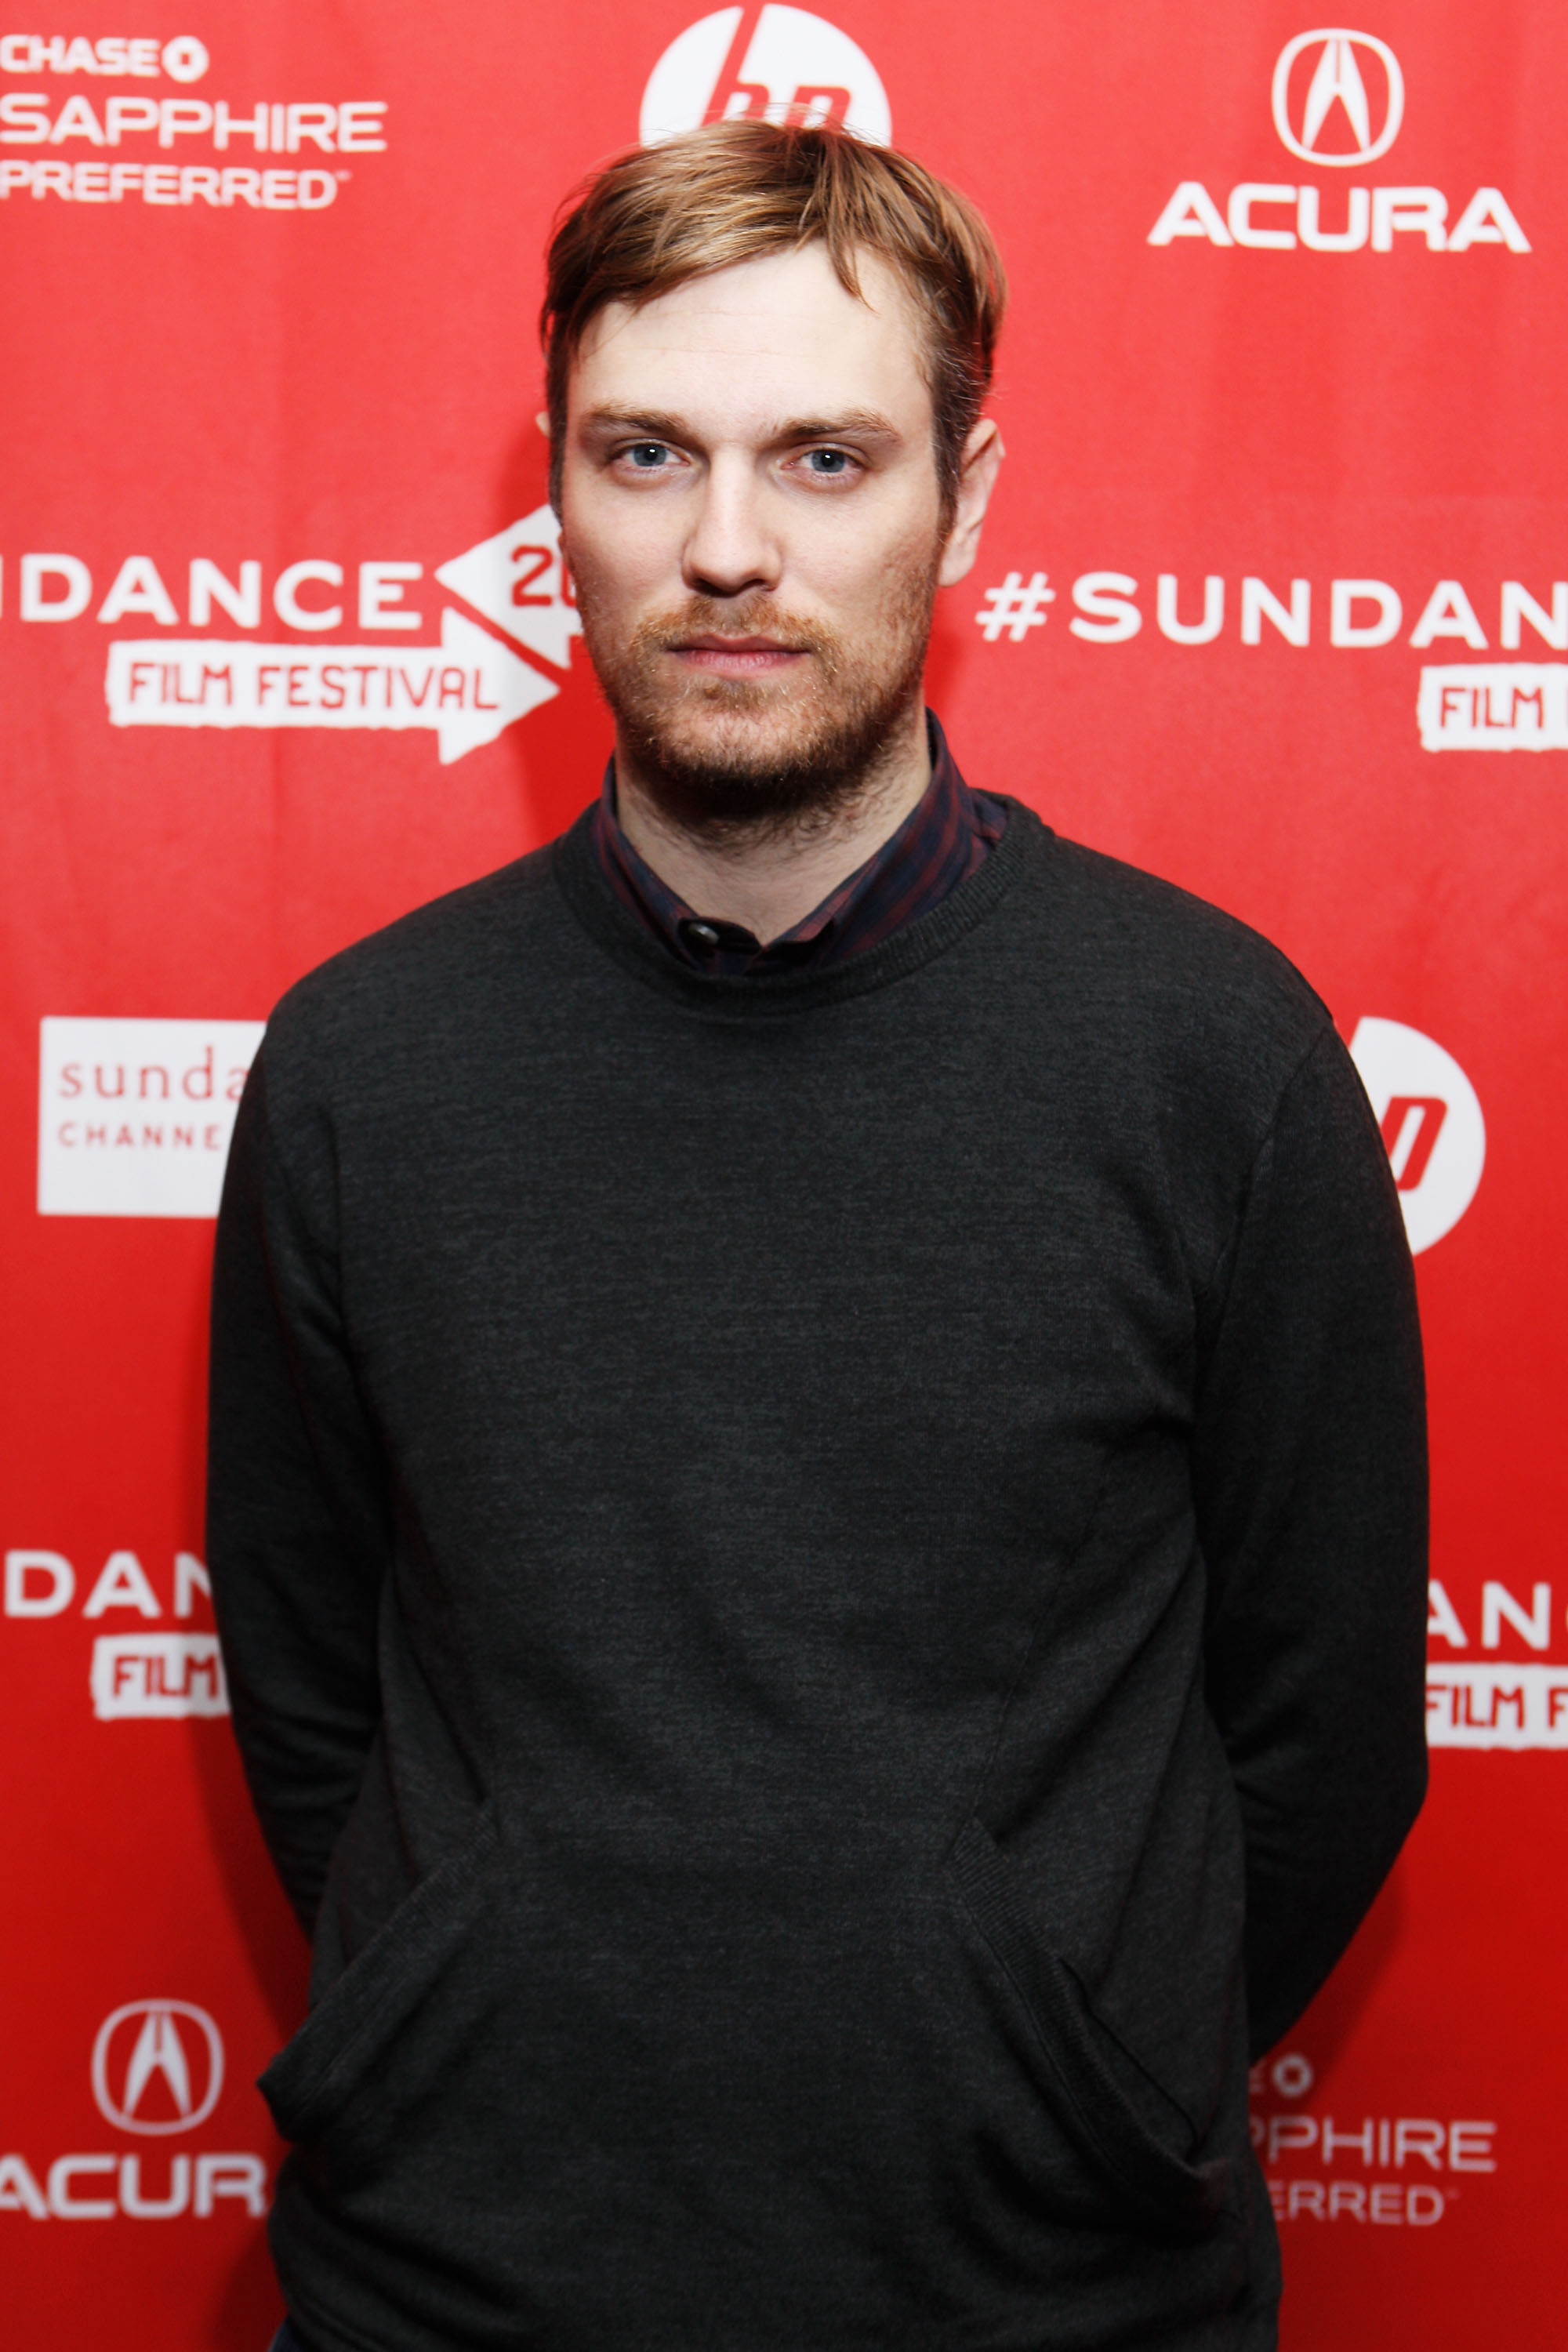 Zachary Heinzerling at Sundance 2013 - World Premiere of Cutie and the Boxer